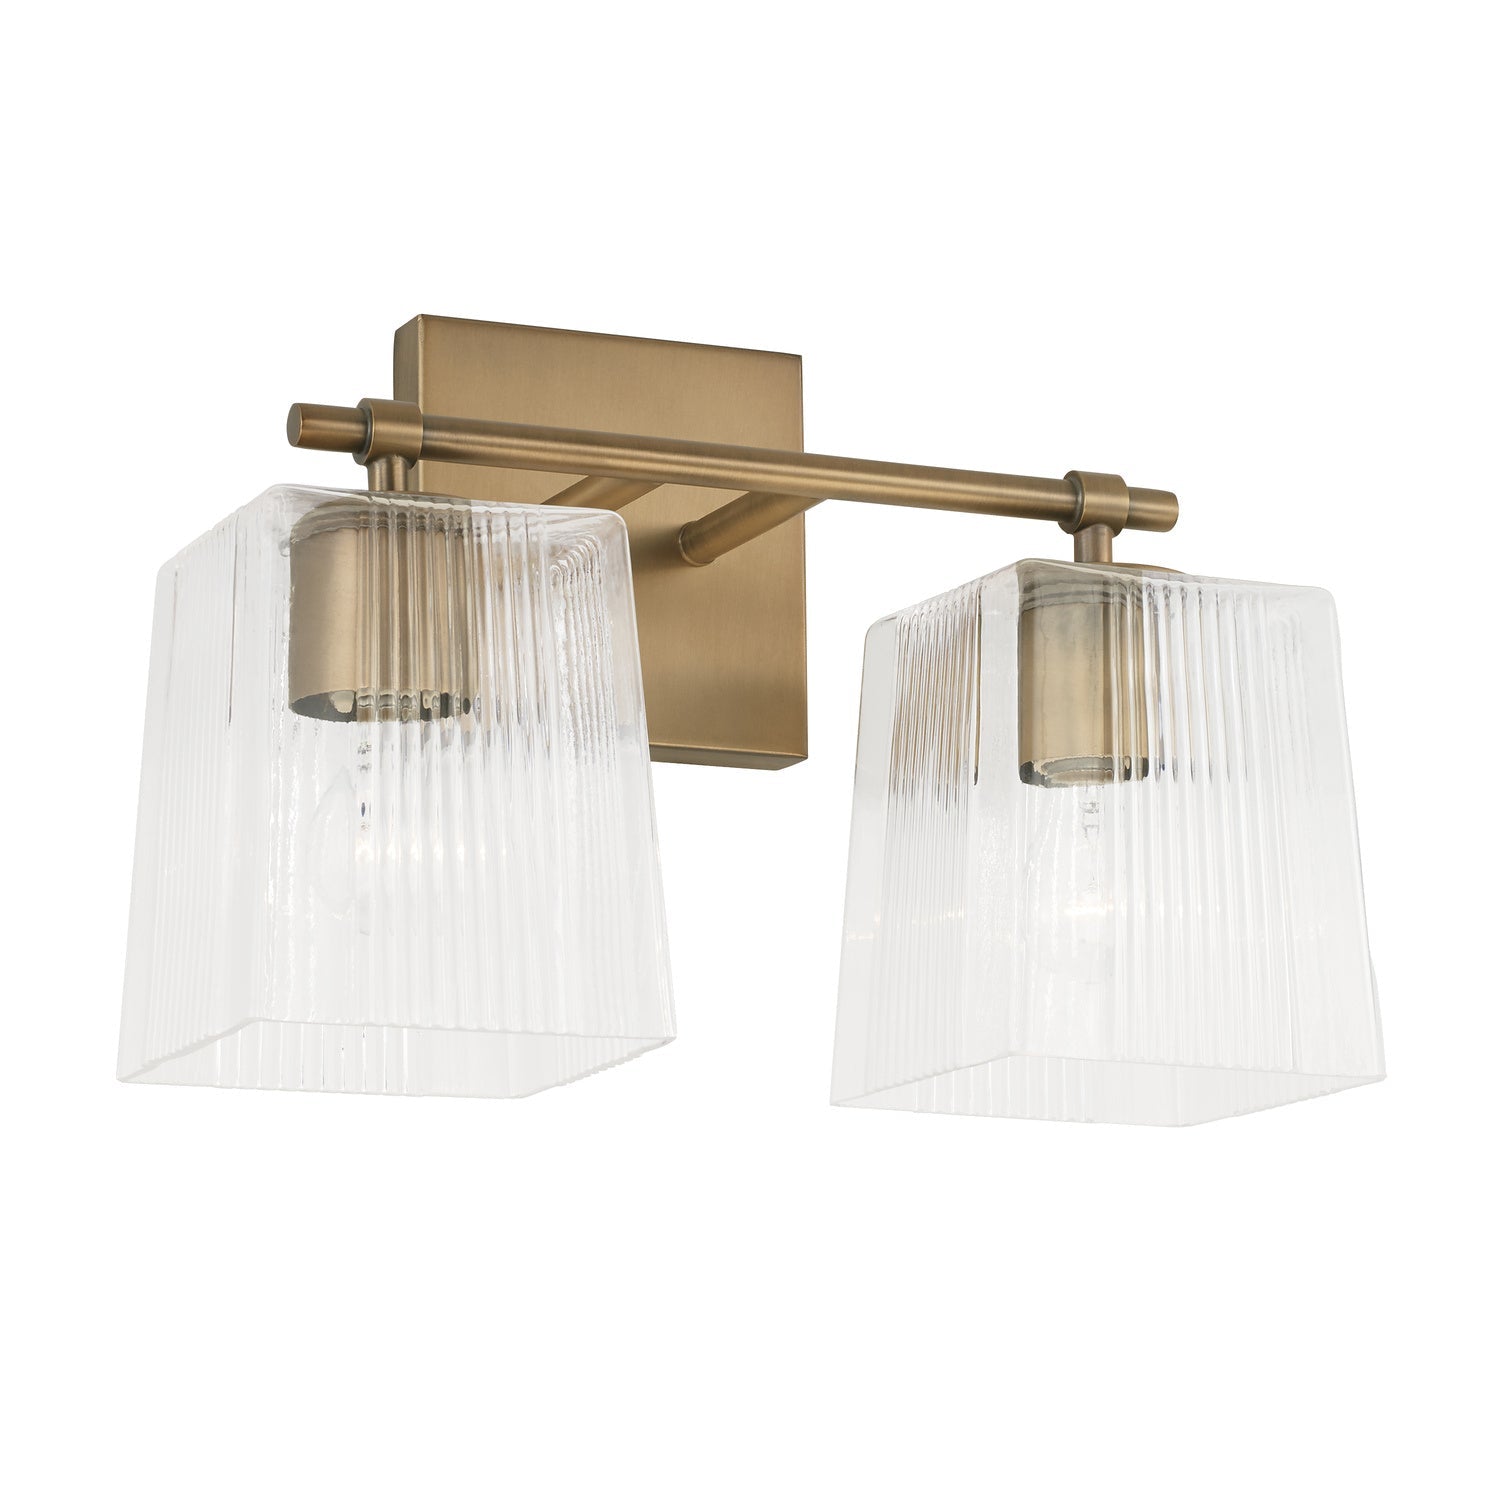 Capital Lexi 141721AD-508 Bath Vanity Light 14 in. wide - Aged Brass